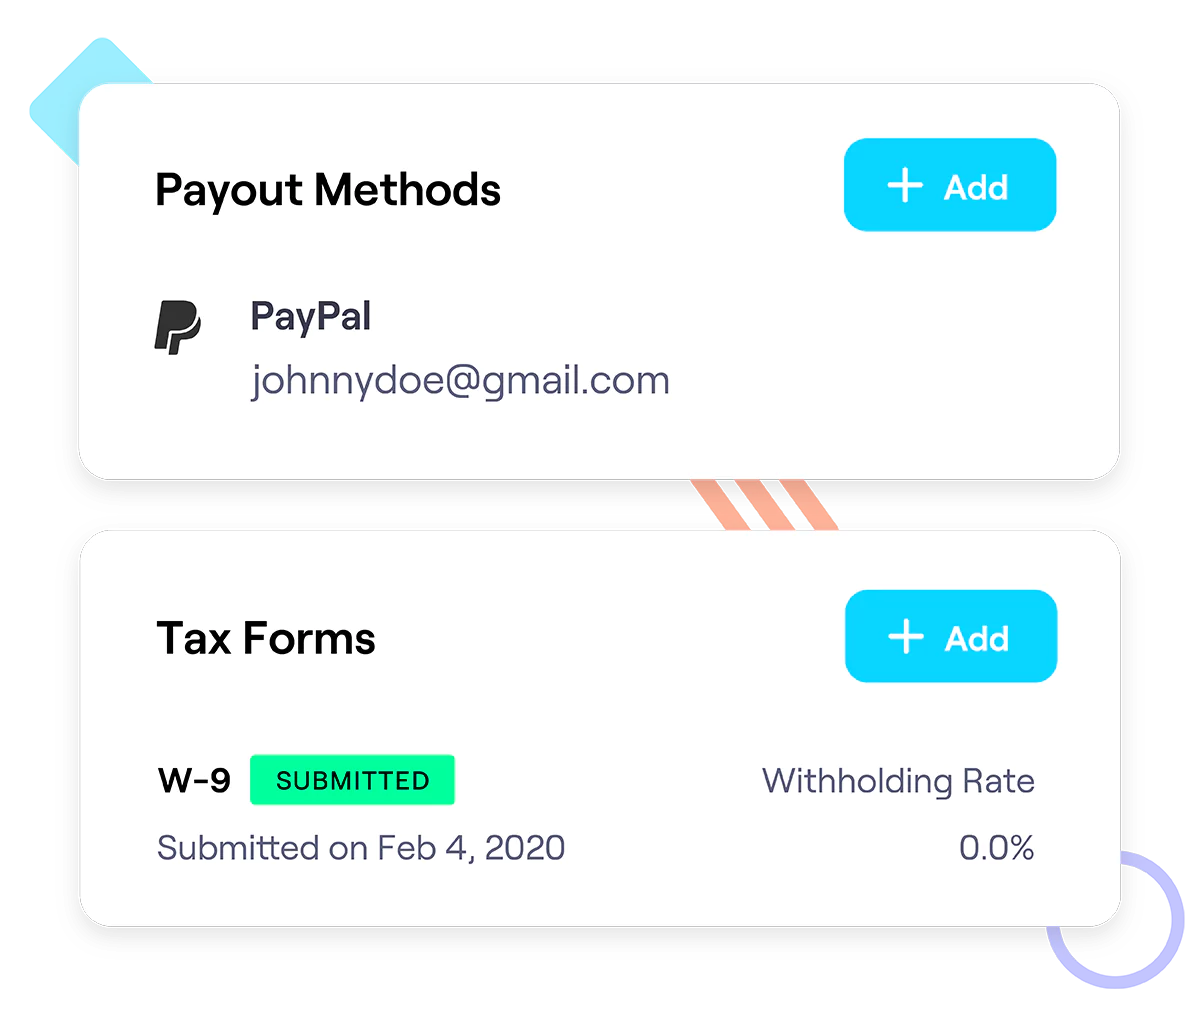 Product: Payments 10